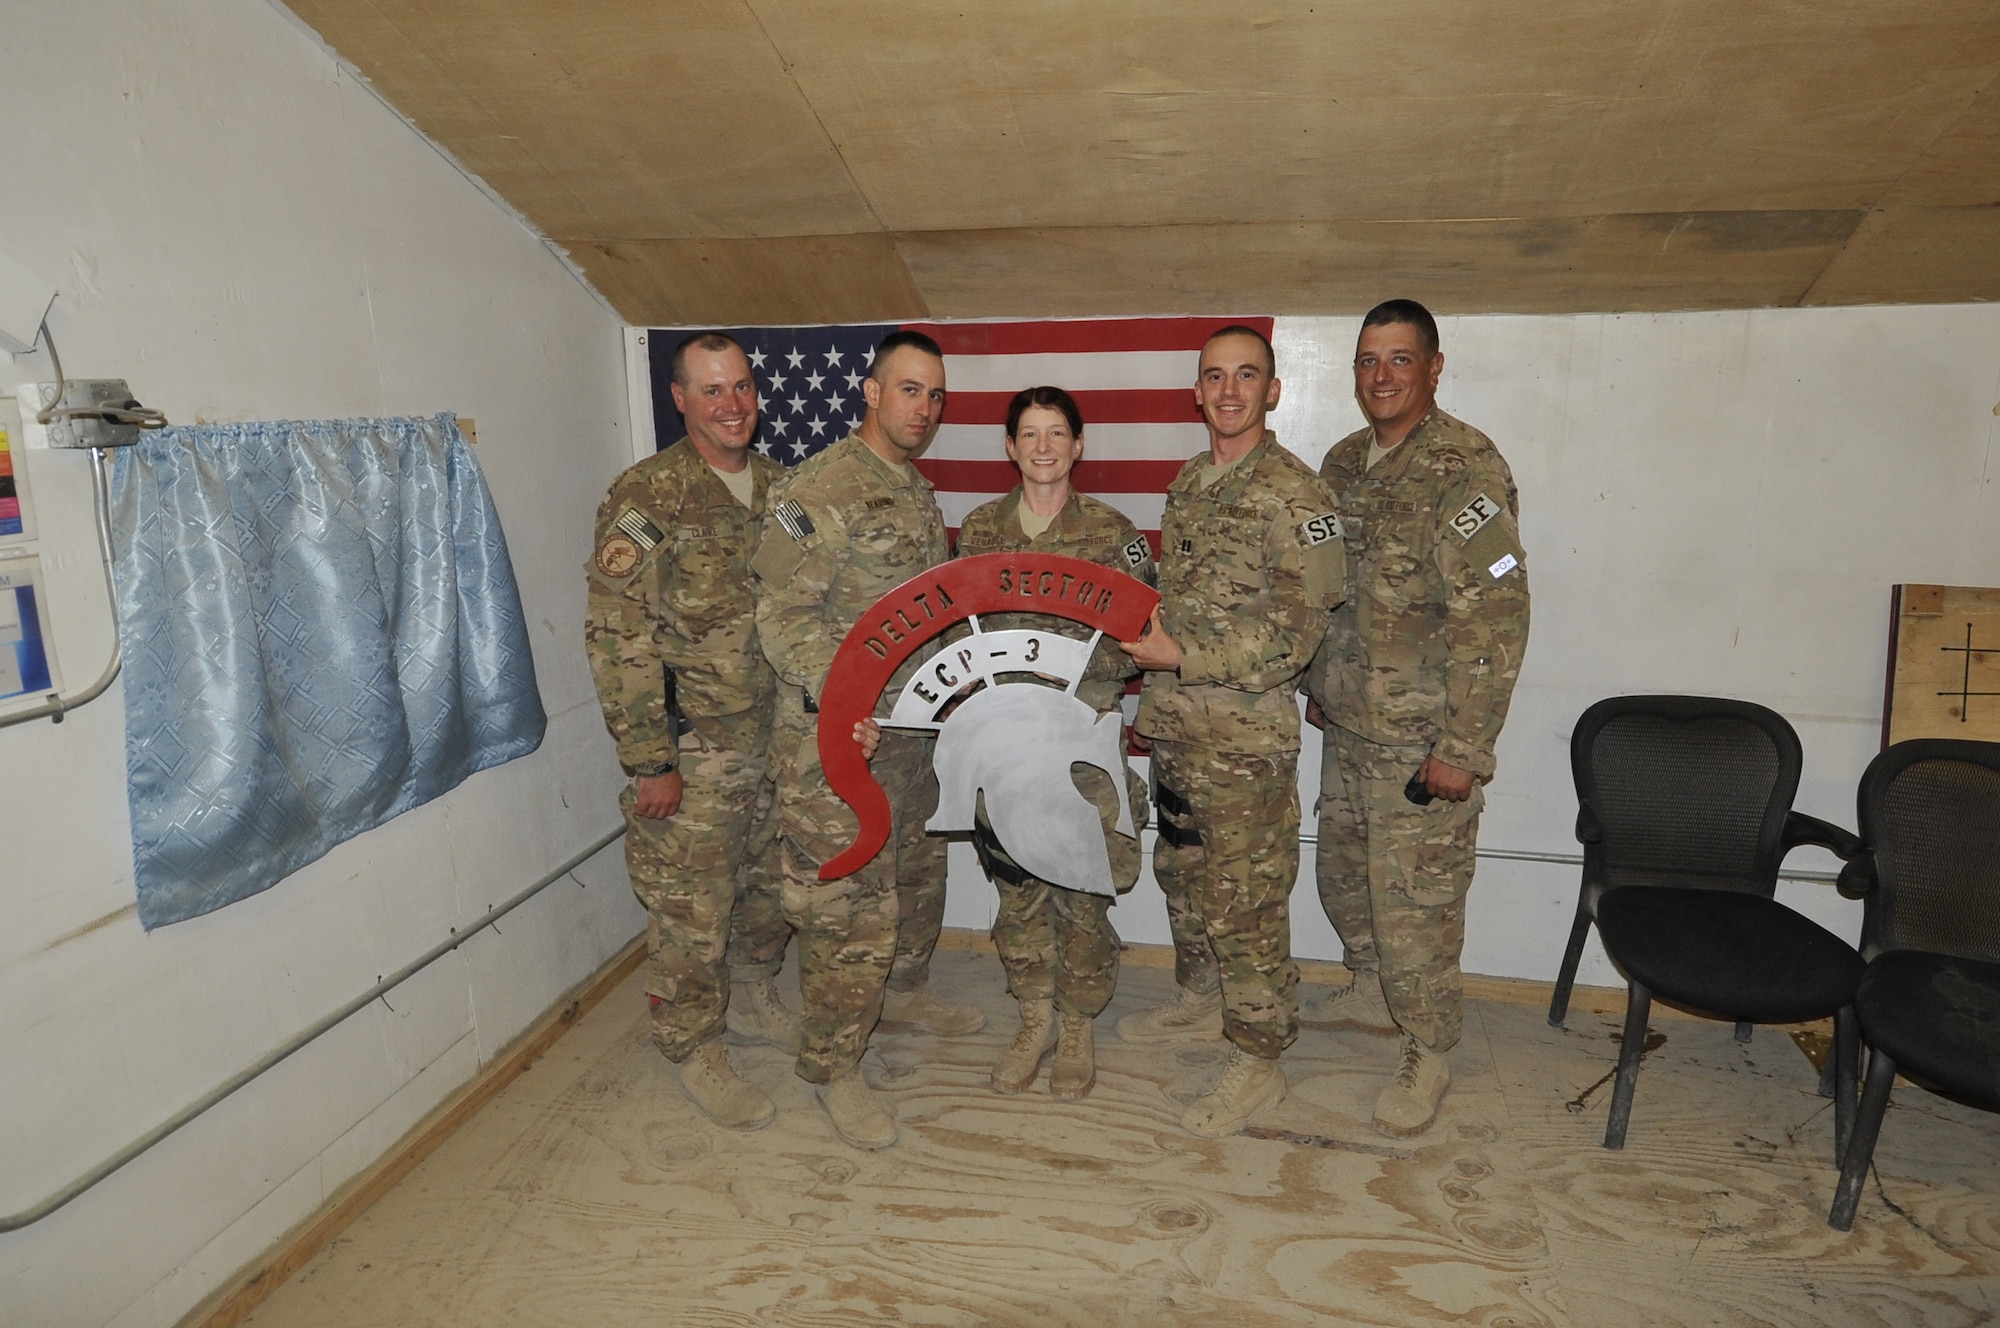 (left to right) Master Sgt. Joshua Clarke, Tech. Sgt. Eric Wearing, Airman 1st Class Tina Venable, Capt. Andrew York and Staff Sgt. Joshua Gary, 455 Expeditionary Security Force Squadron members stand together in their compound on Bagram Airfield, Afghanistan. The members were subject to an Indirect Fire attack last month, where they provided medical care to injured and defended the perimeter (U.S Air Force photo/ Staff Sgt. Stephenie Wade)